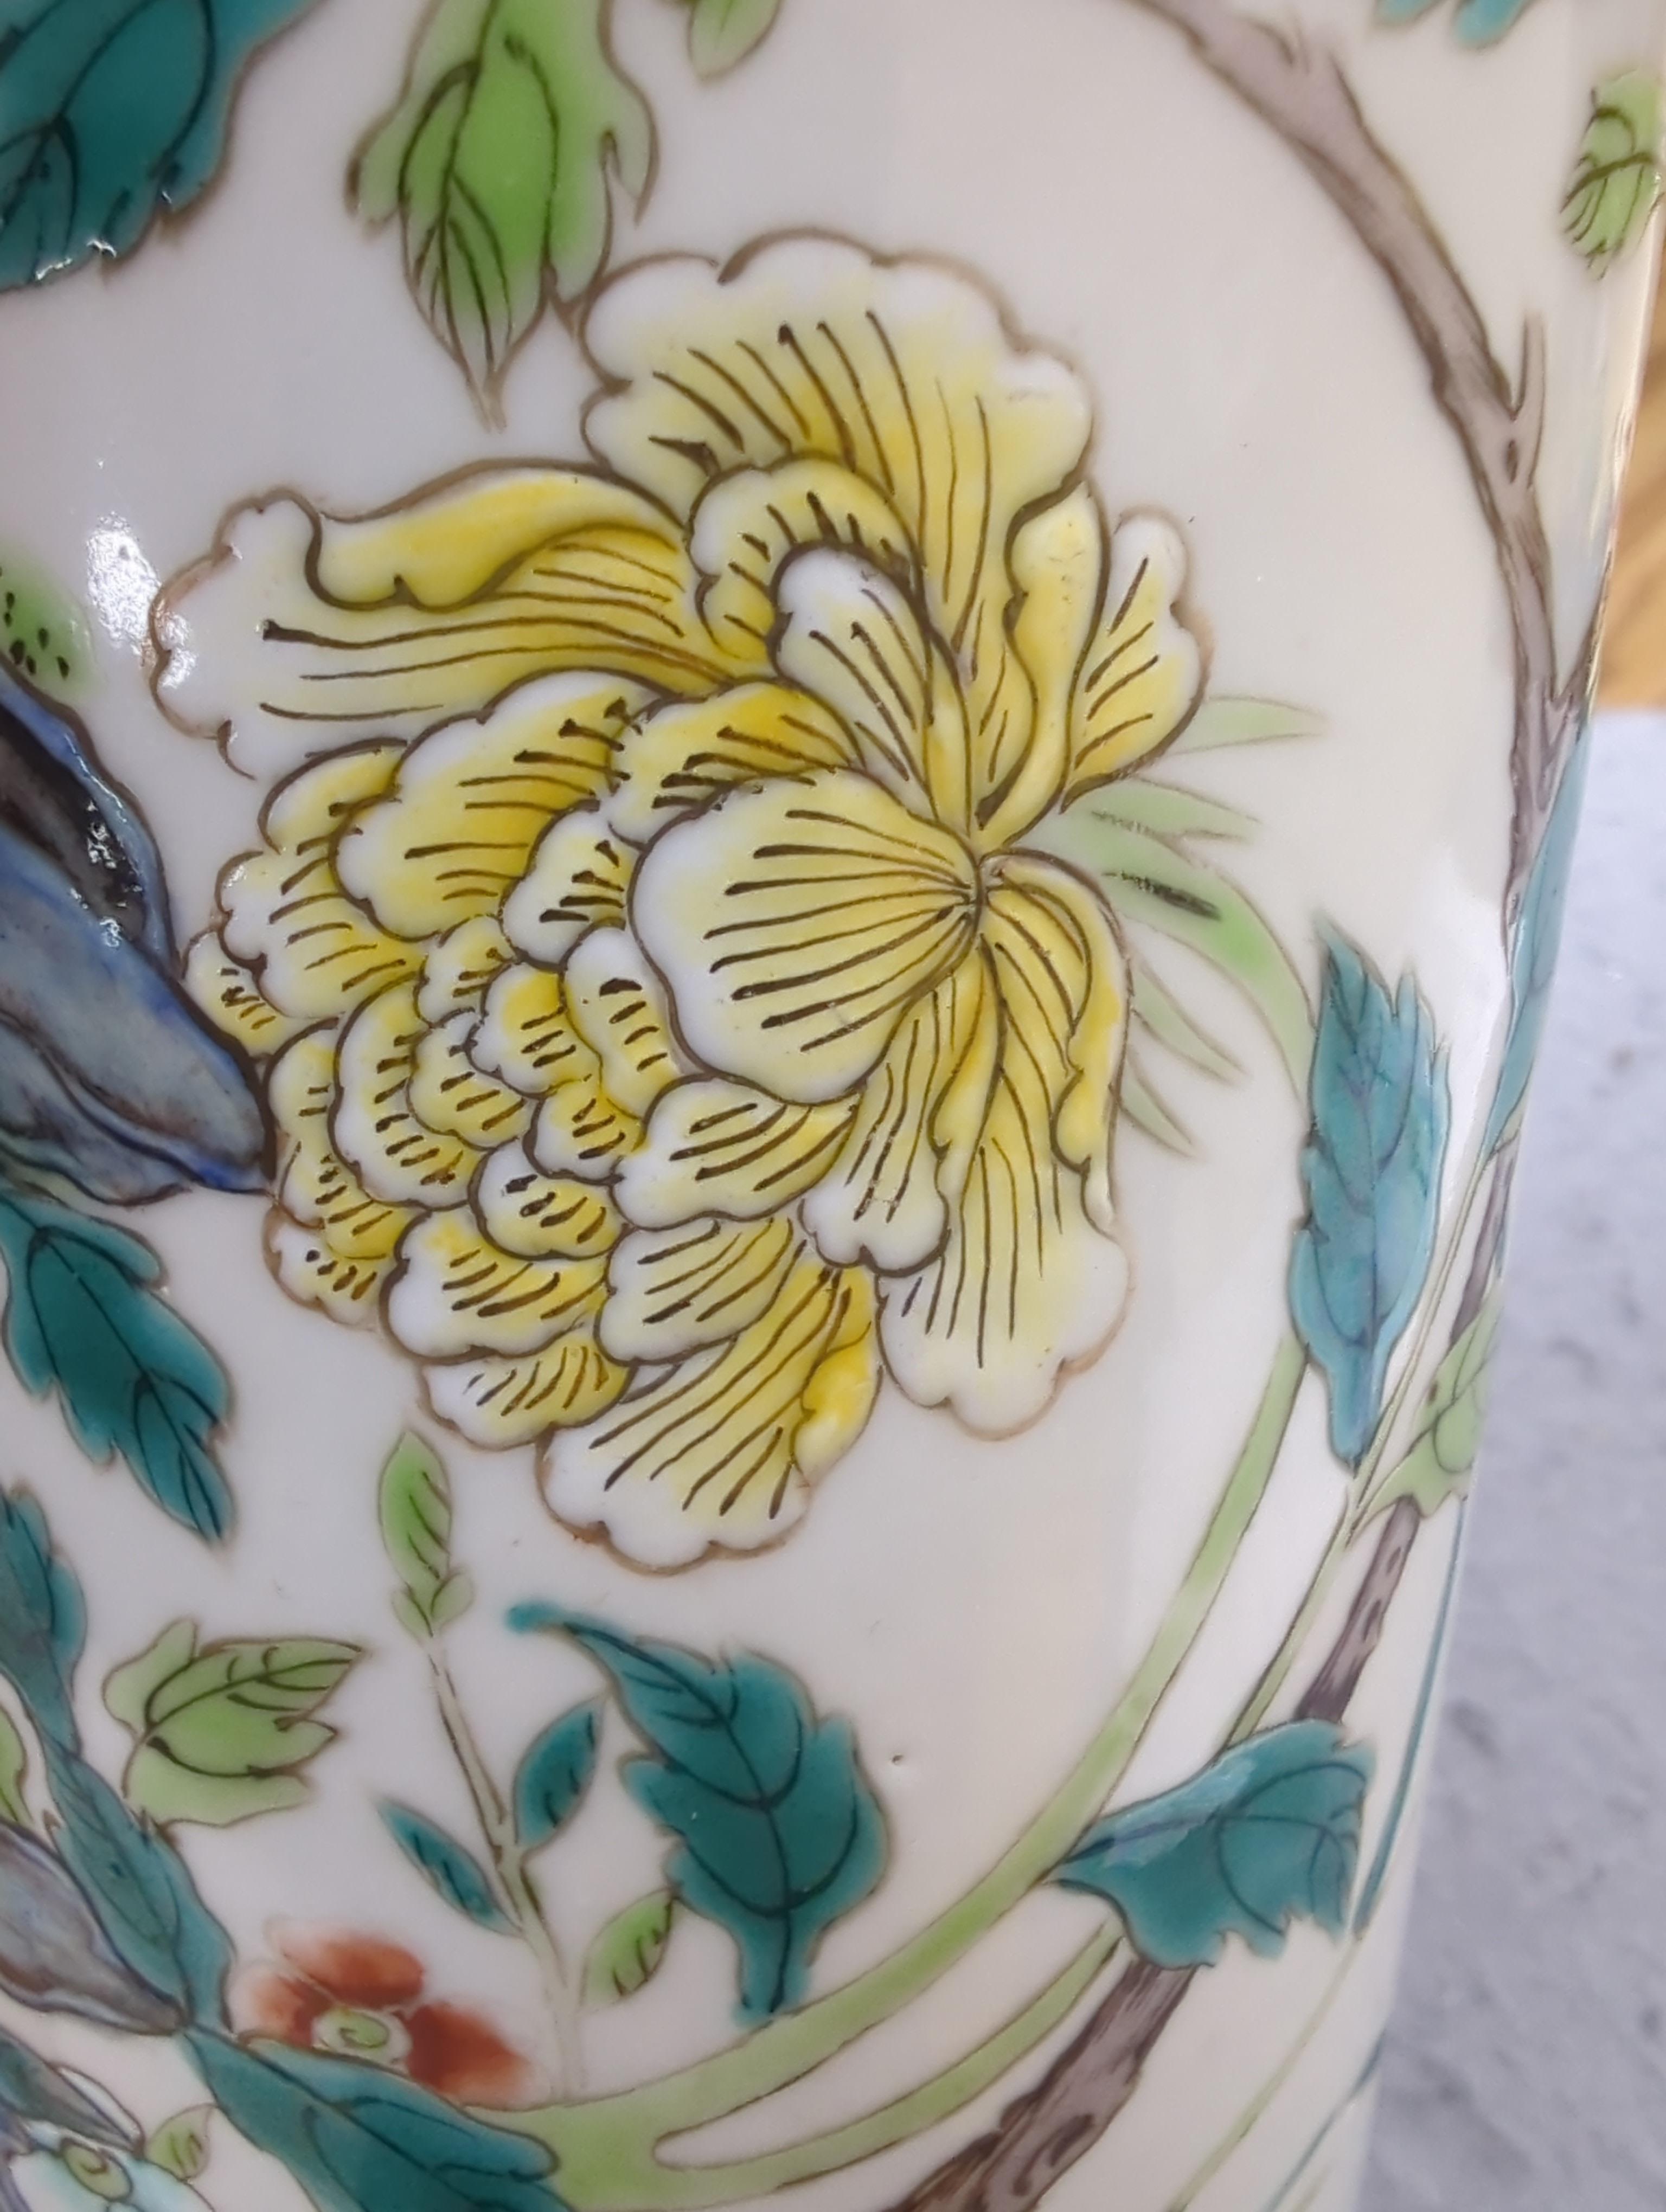 A Chinese famille rose cylindrical vase, 31cm